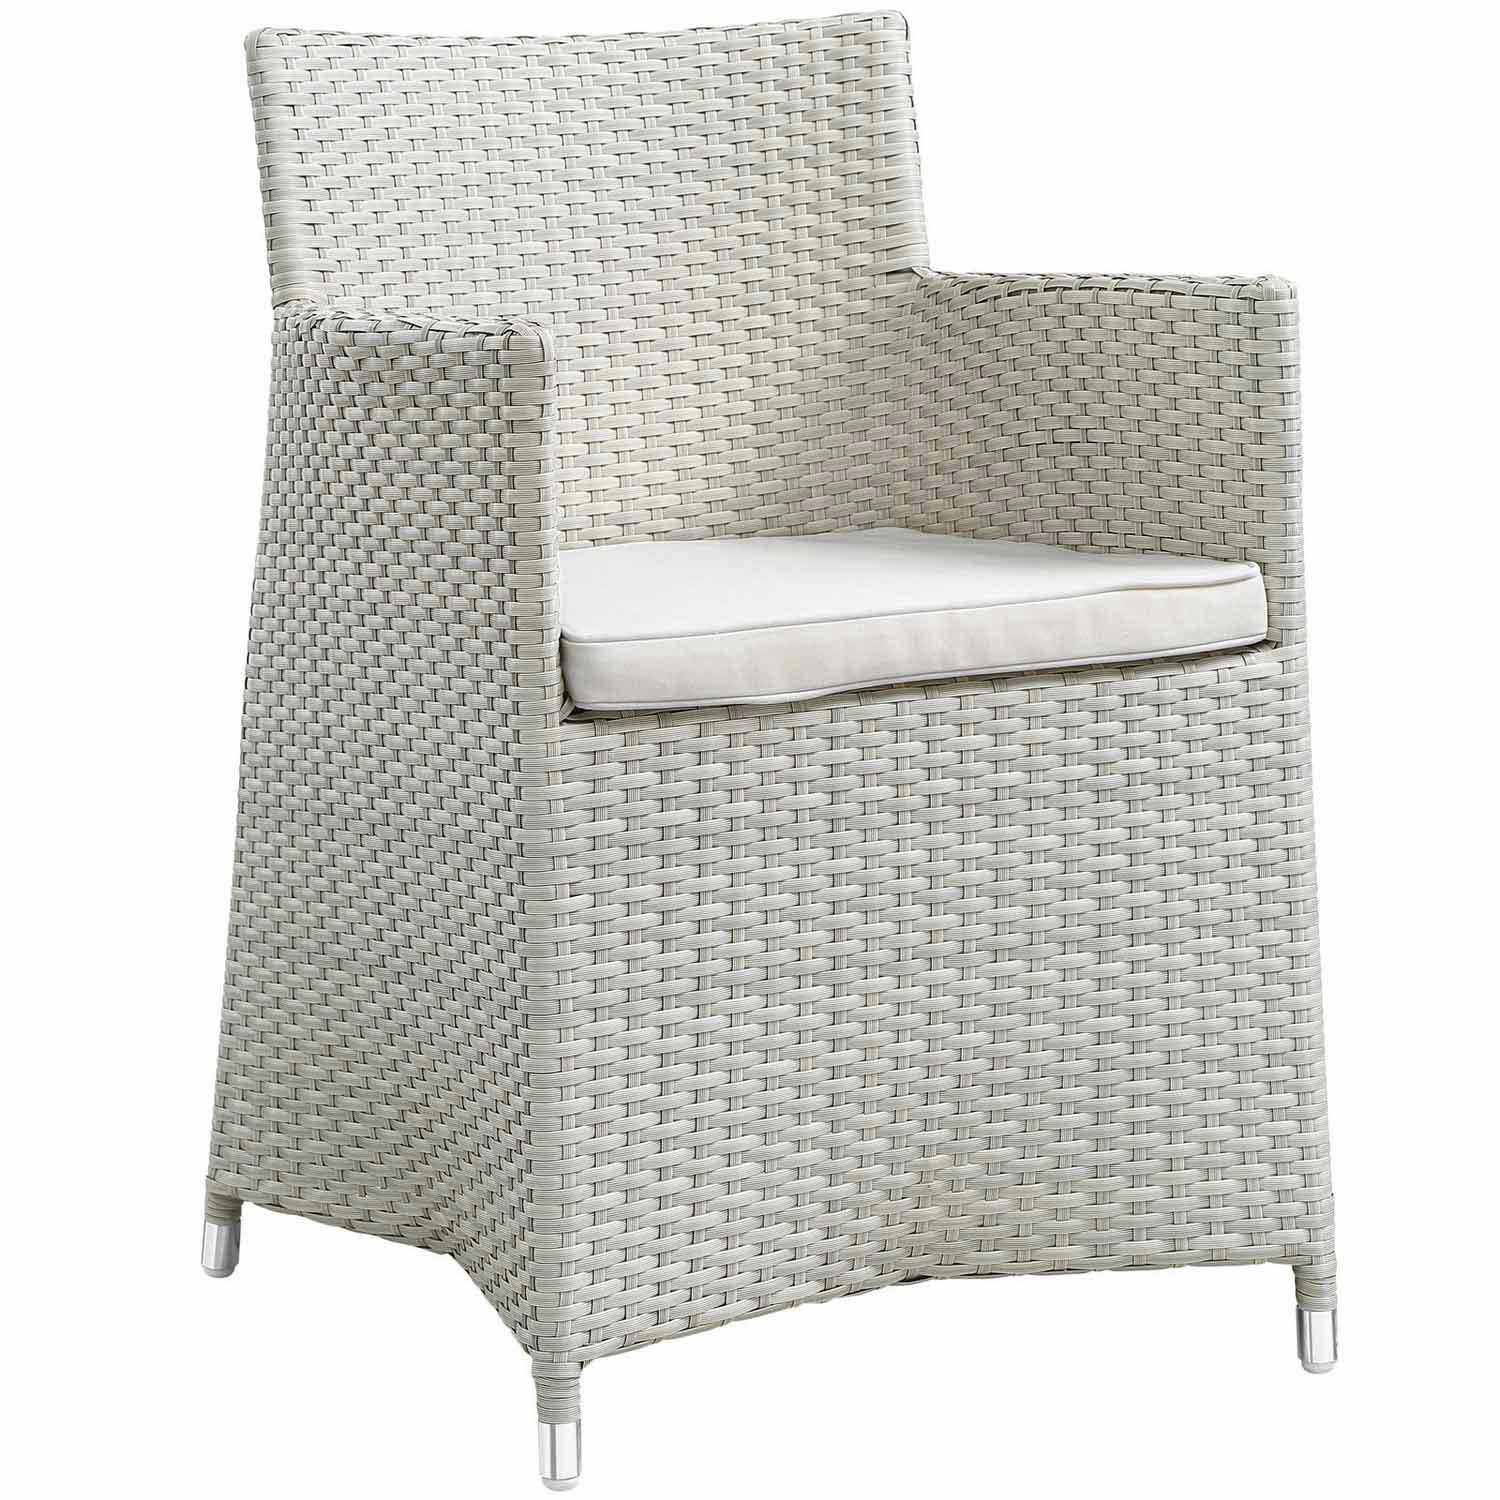 Modway Junction Armchair Outdoor Patio Wicker Set of 2 - Gray/White